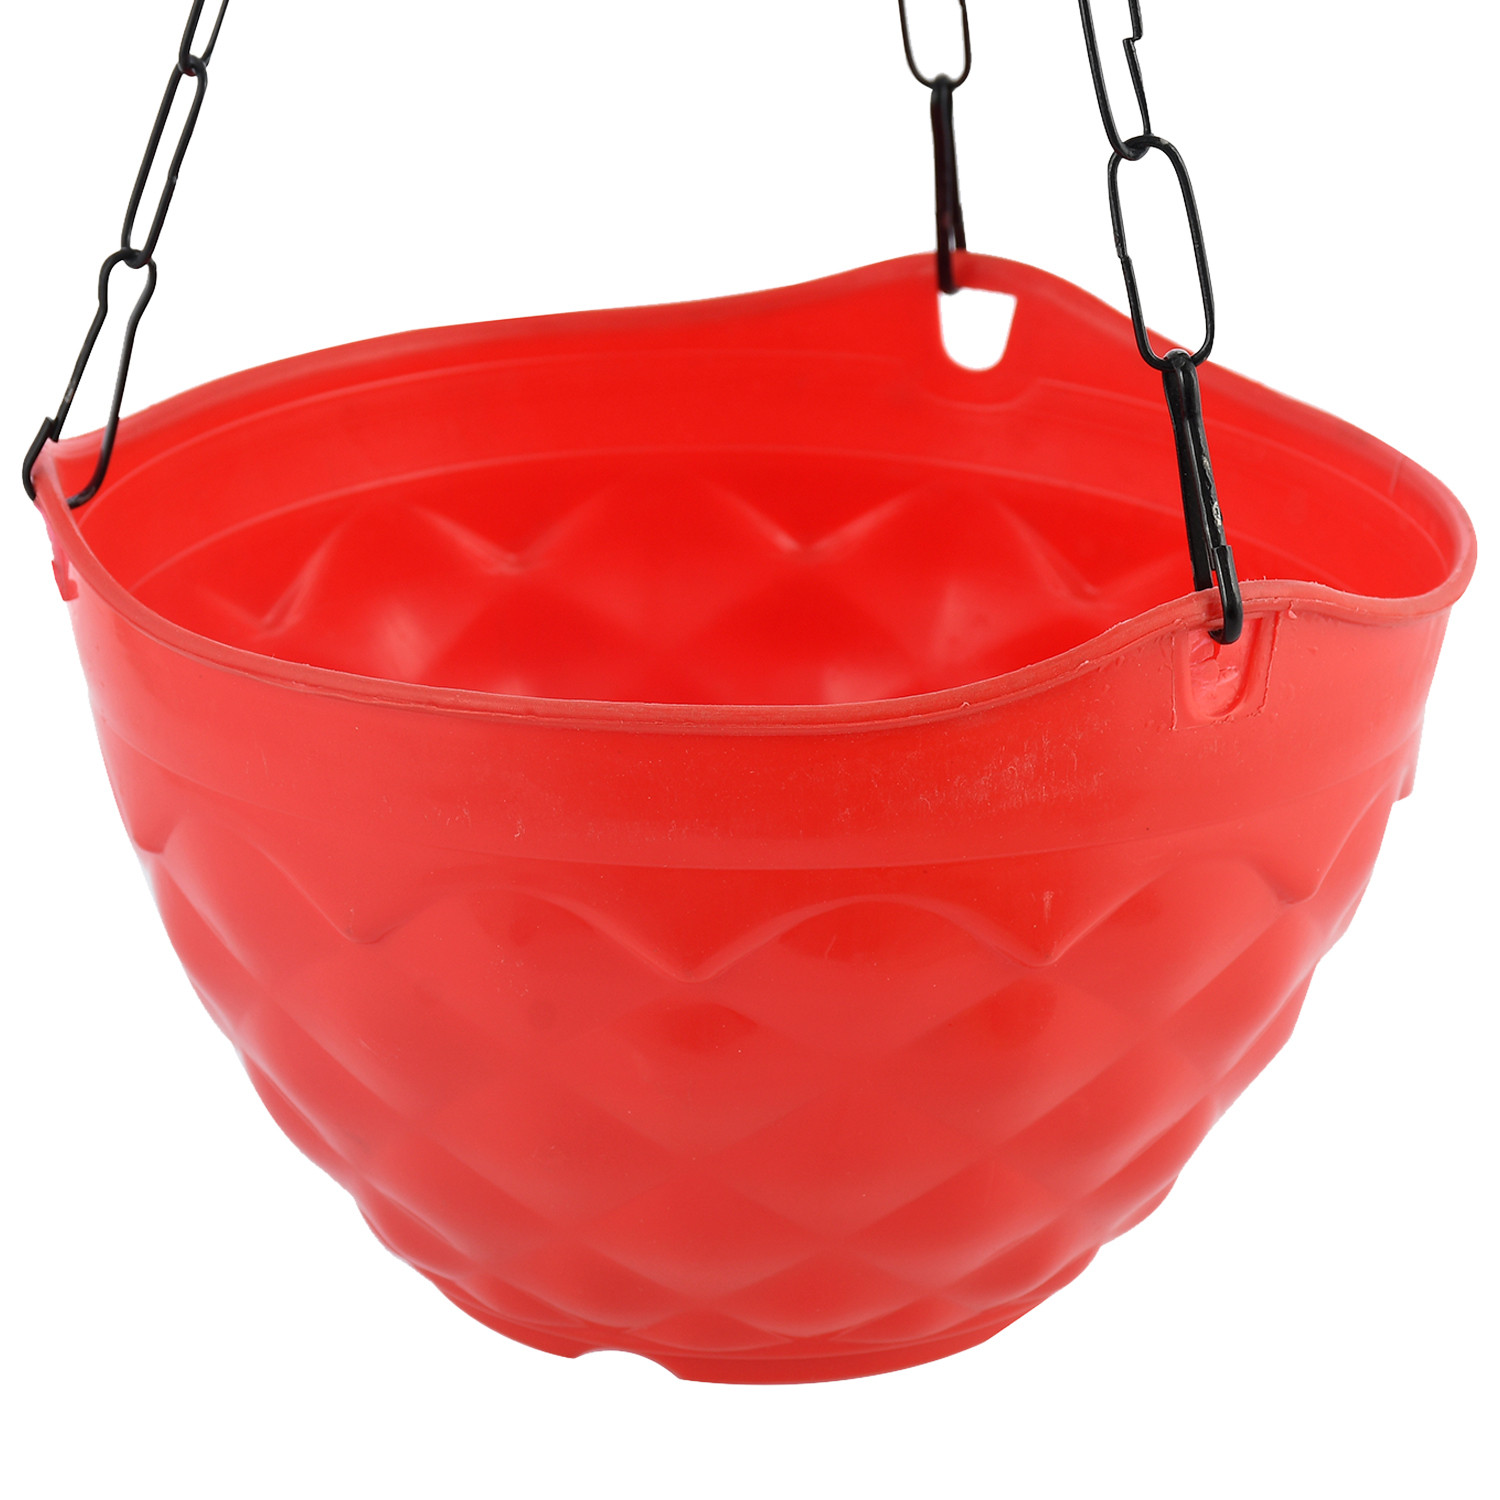 Kuber Industries Diamond Flower Pot|Durable Plastic Hanging Basket Flower Planter with Chain for Home|Garden|Balcony (Red)